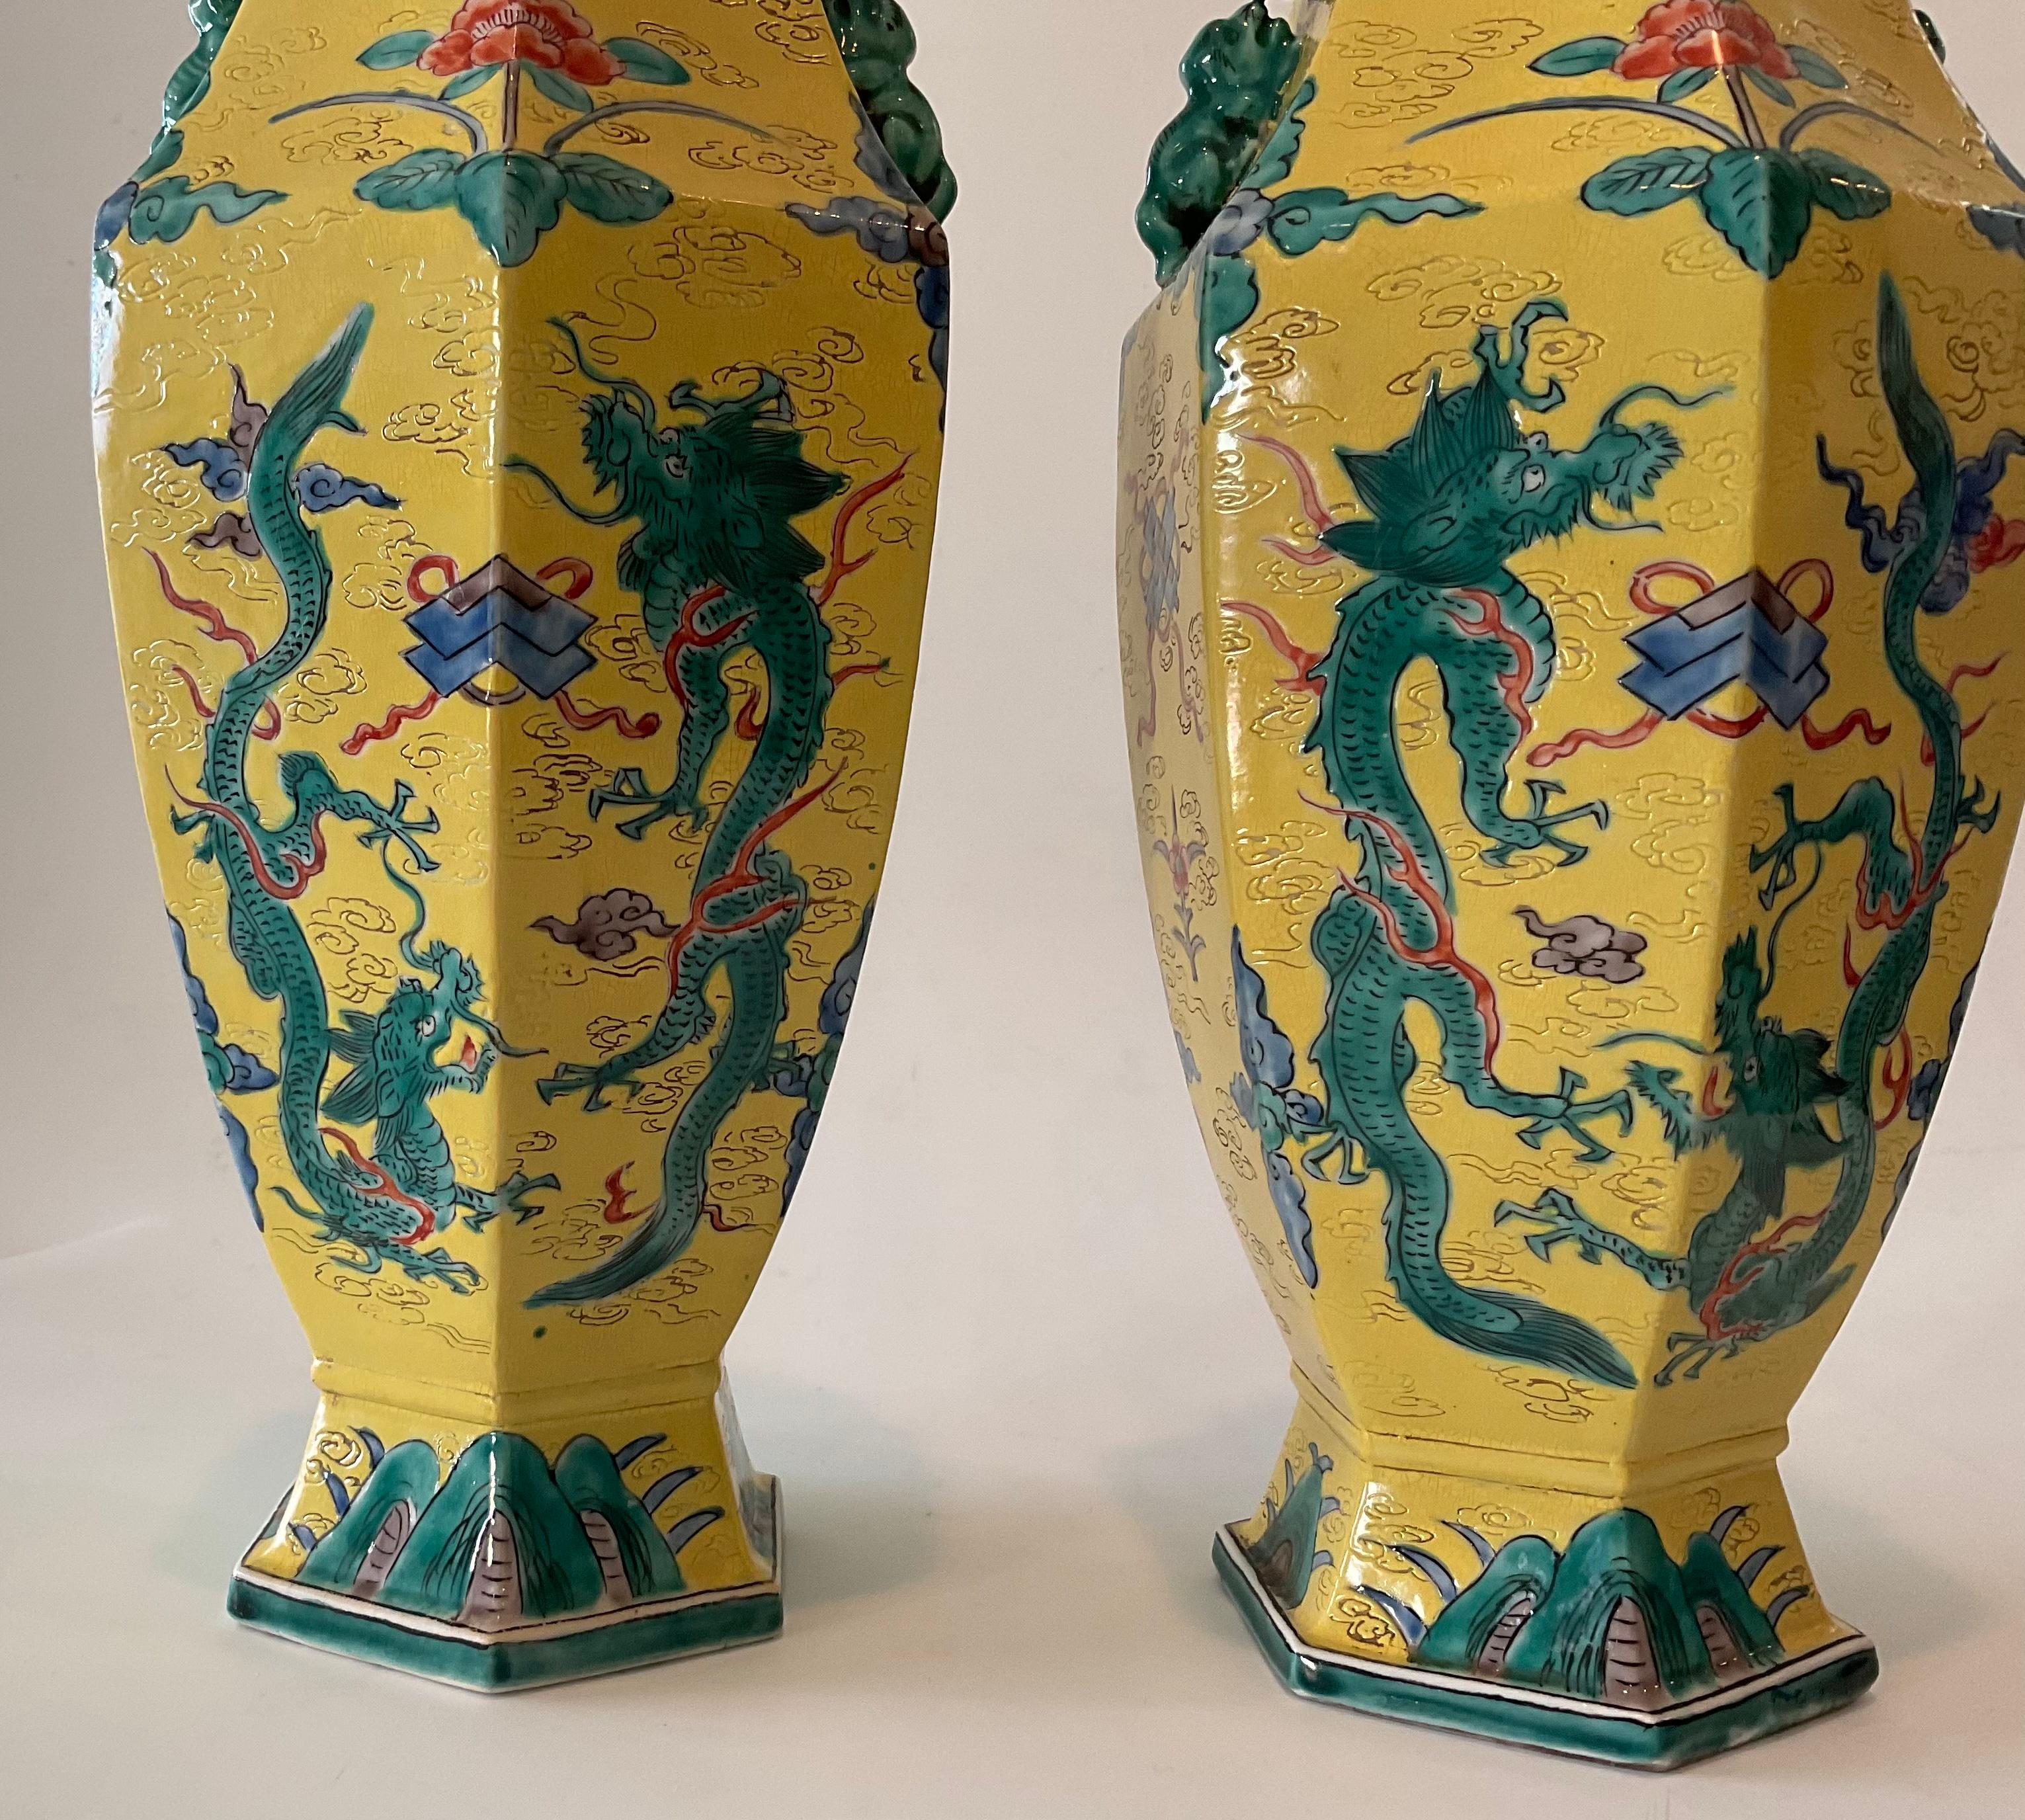 Bright Yellow Signed Chinese Pair of Porcelain vases with dragon decoration. Signature on bottom of each vase as shown.